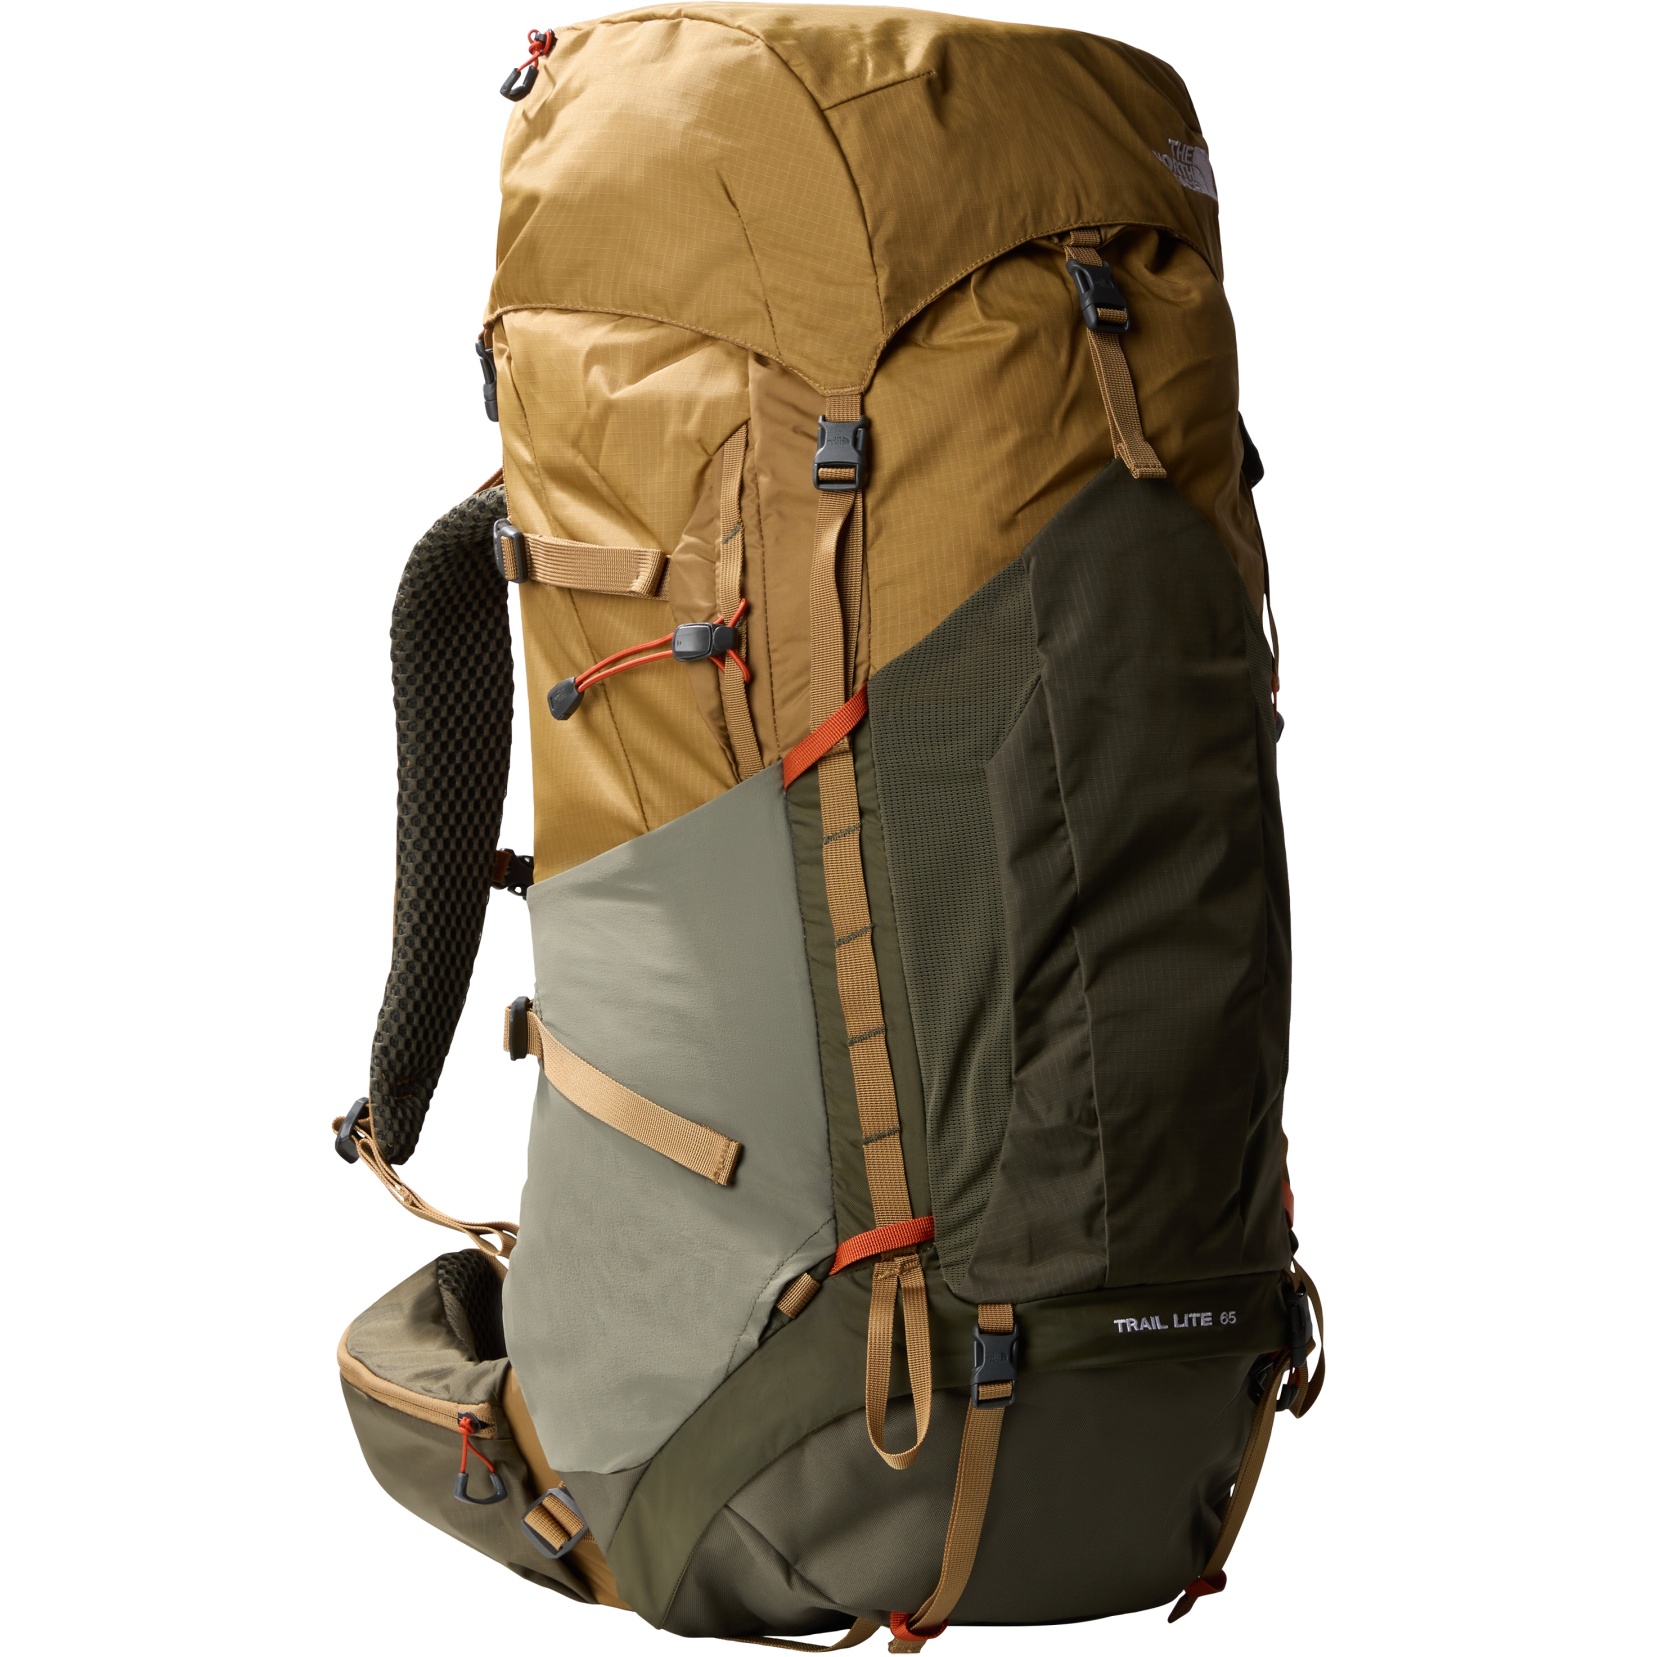 Picture of The North Face Trail Lite 65L Backpack - Utility Brown/New Taupe Green